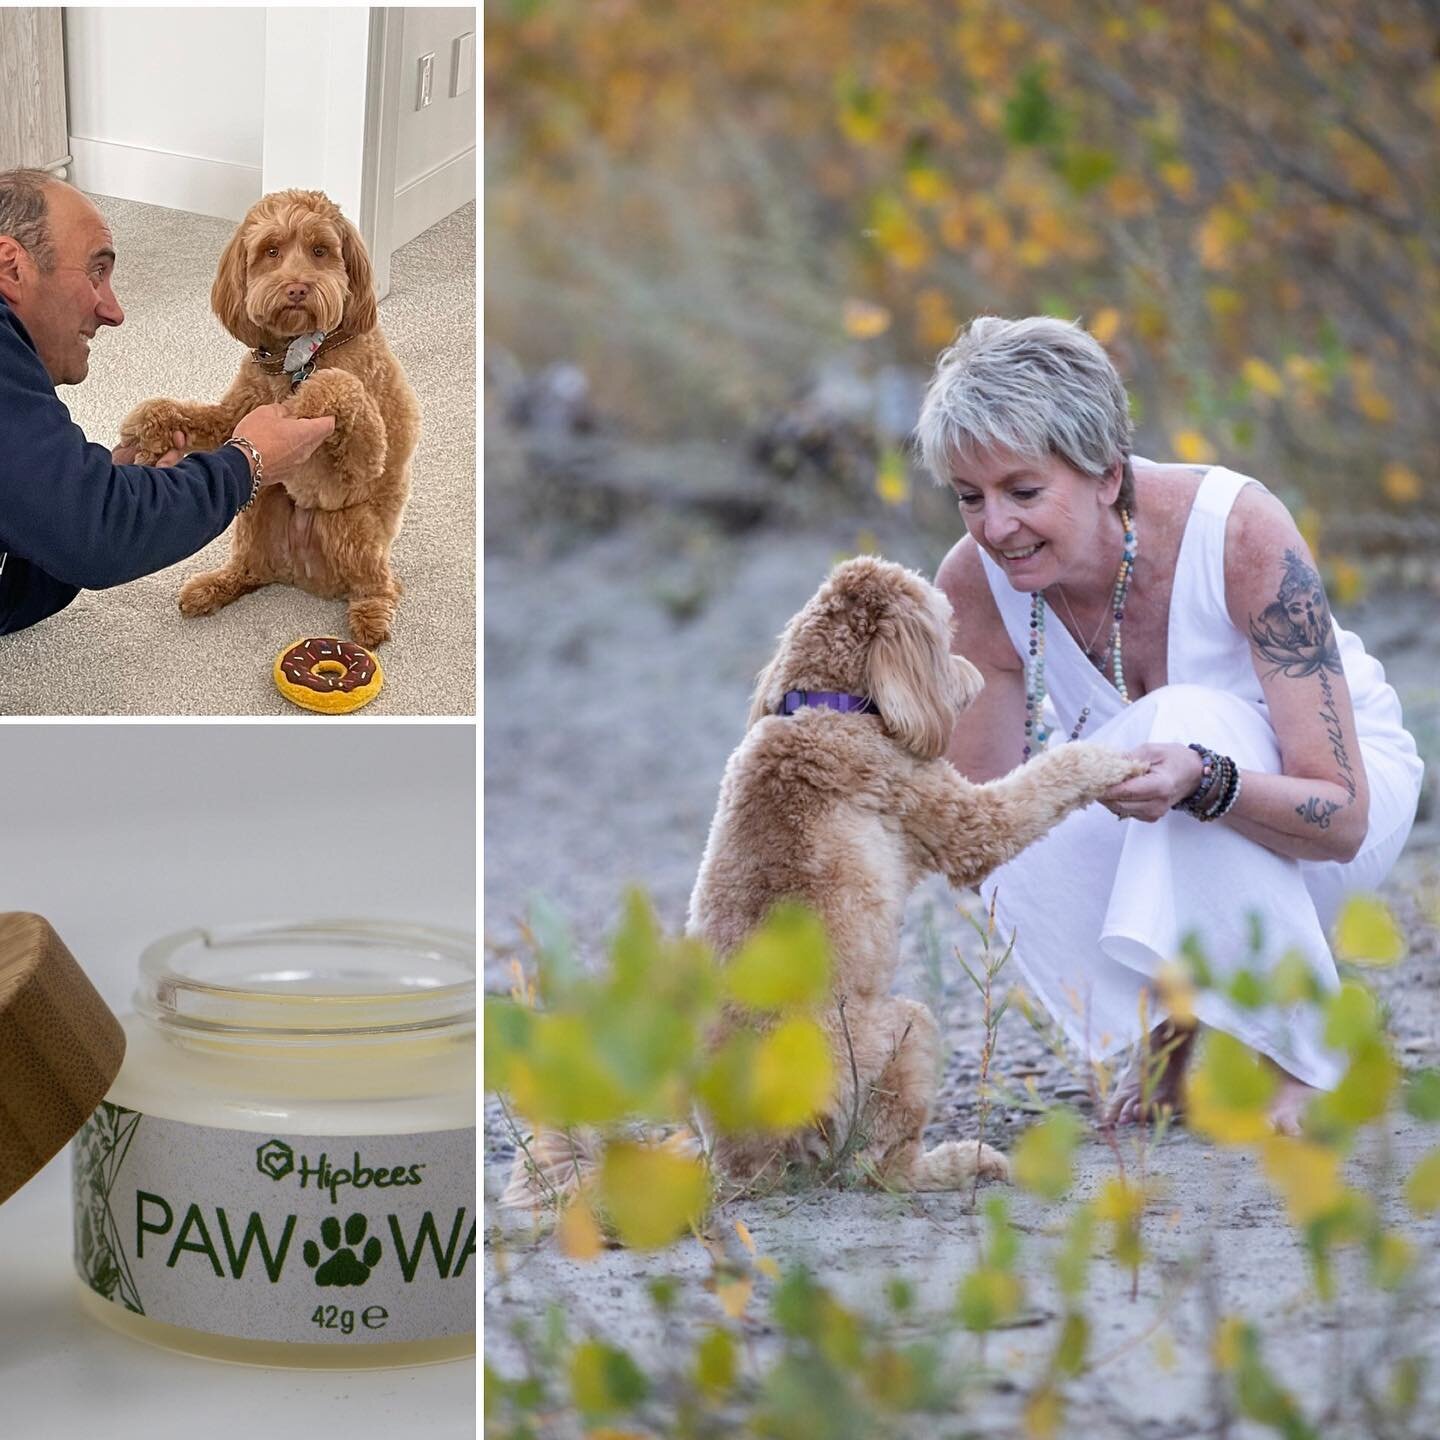 Self care comes in many ways. One of the greatest ways Mr. Cooper gets his self care on is from @hipbees this beautiful woman has created so many amazing products that I have been able to try. But Mr. Cooper&rsquo;s fave is Paw Wax  Keeps his little 